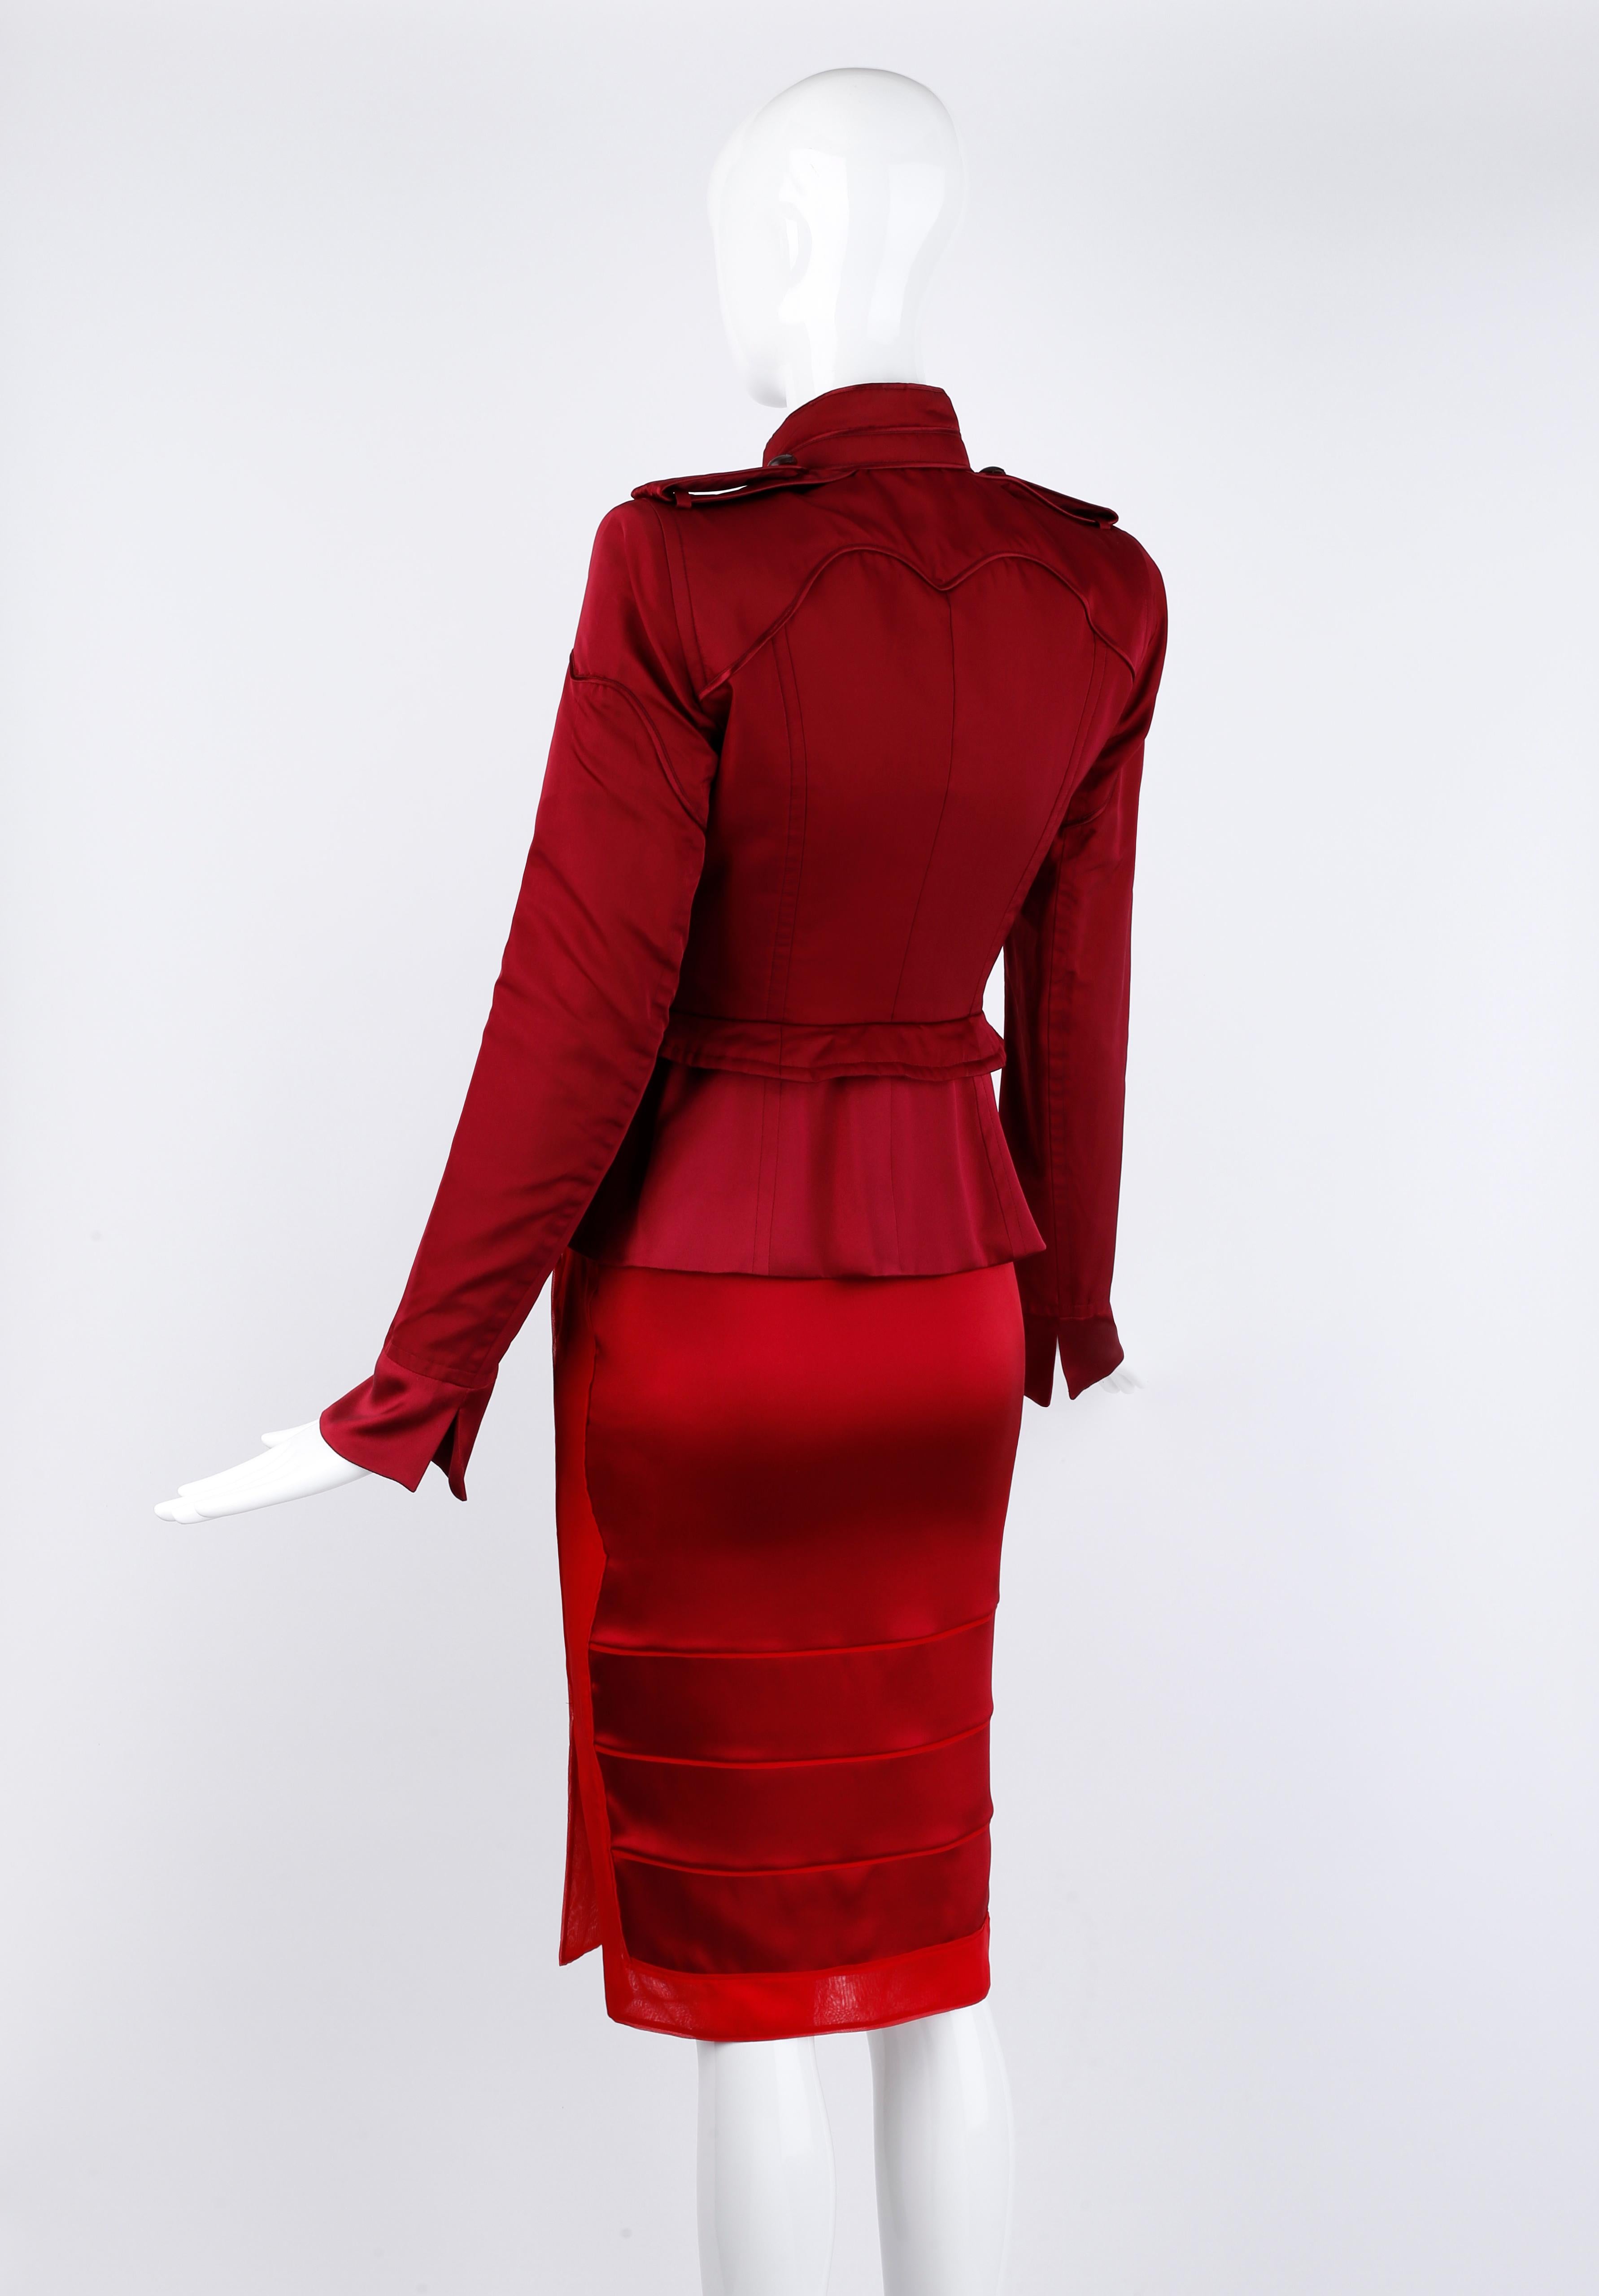 Yves Saint Laurent Tom Ford F/W 2004 Red Maroon Silk Evening Jacket & Skirt Suit For Sale 1